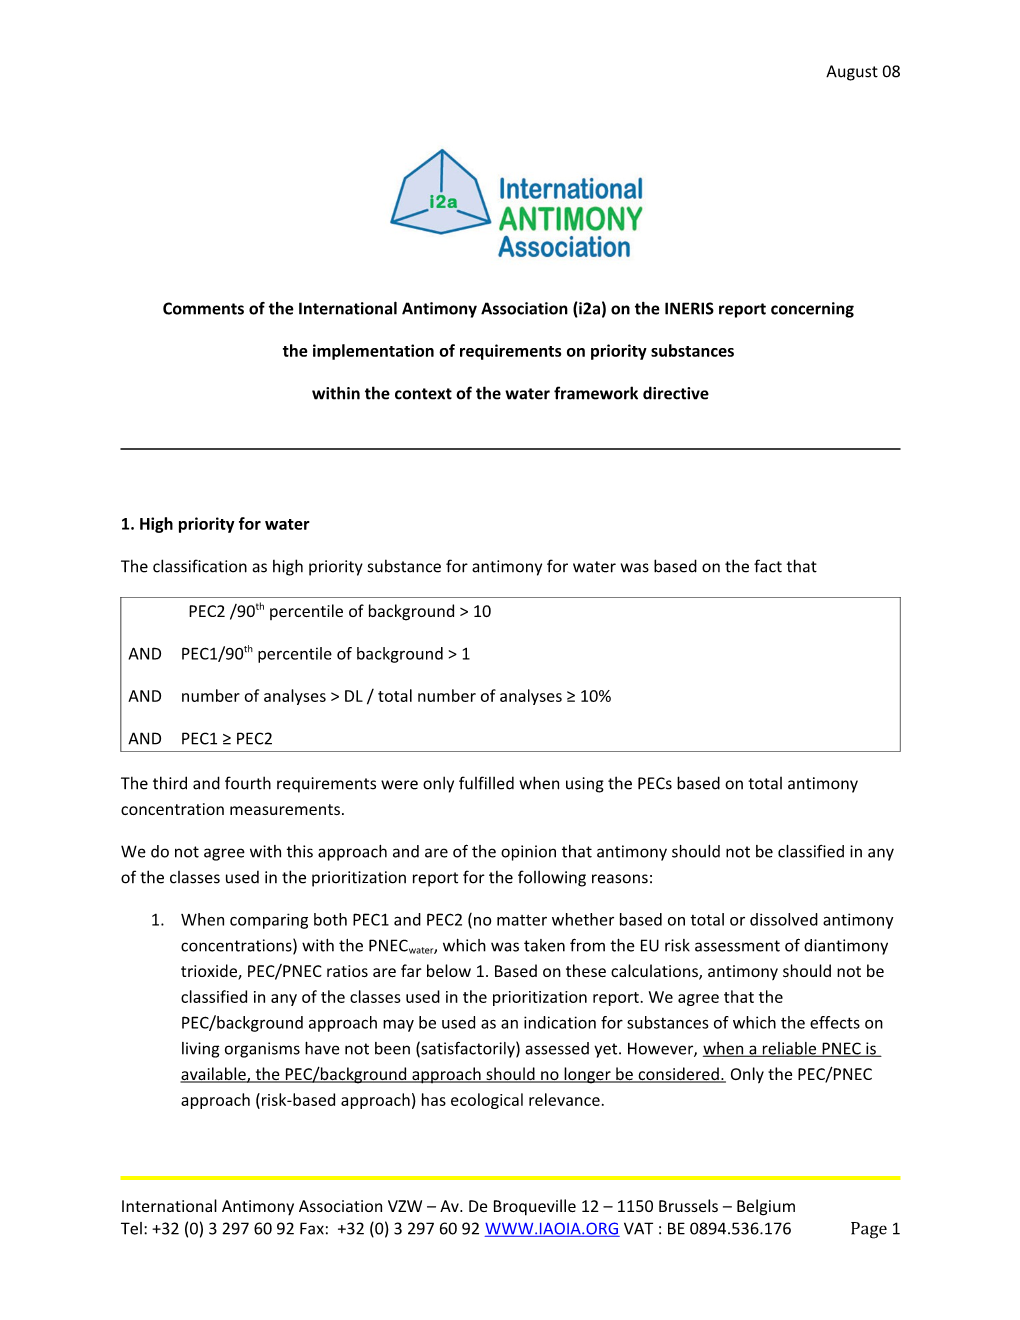 Comments of the International Antimony Association (I2a) on the INERIS Report Concerning